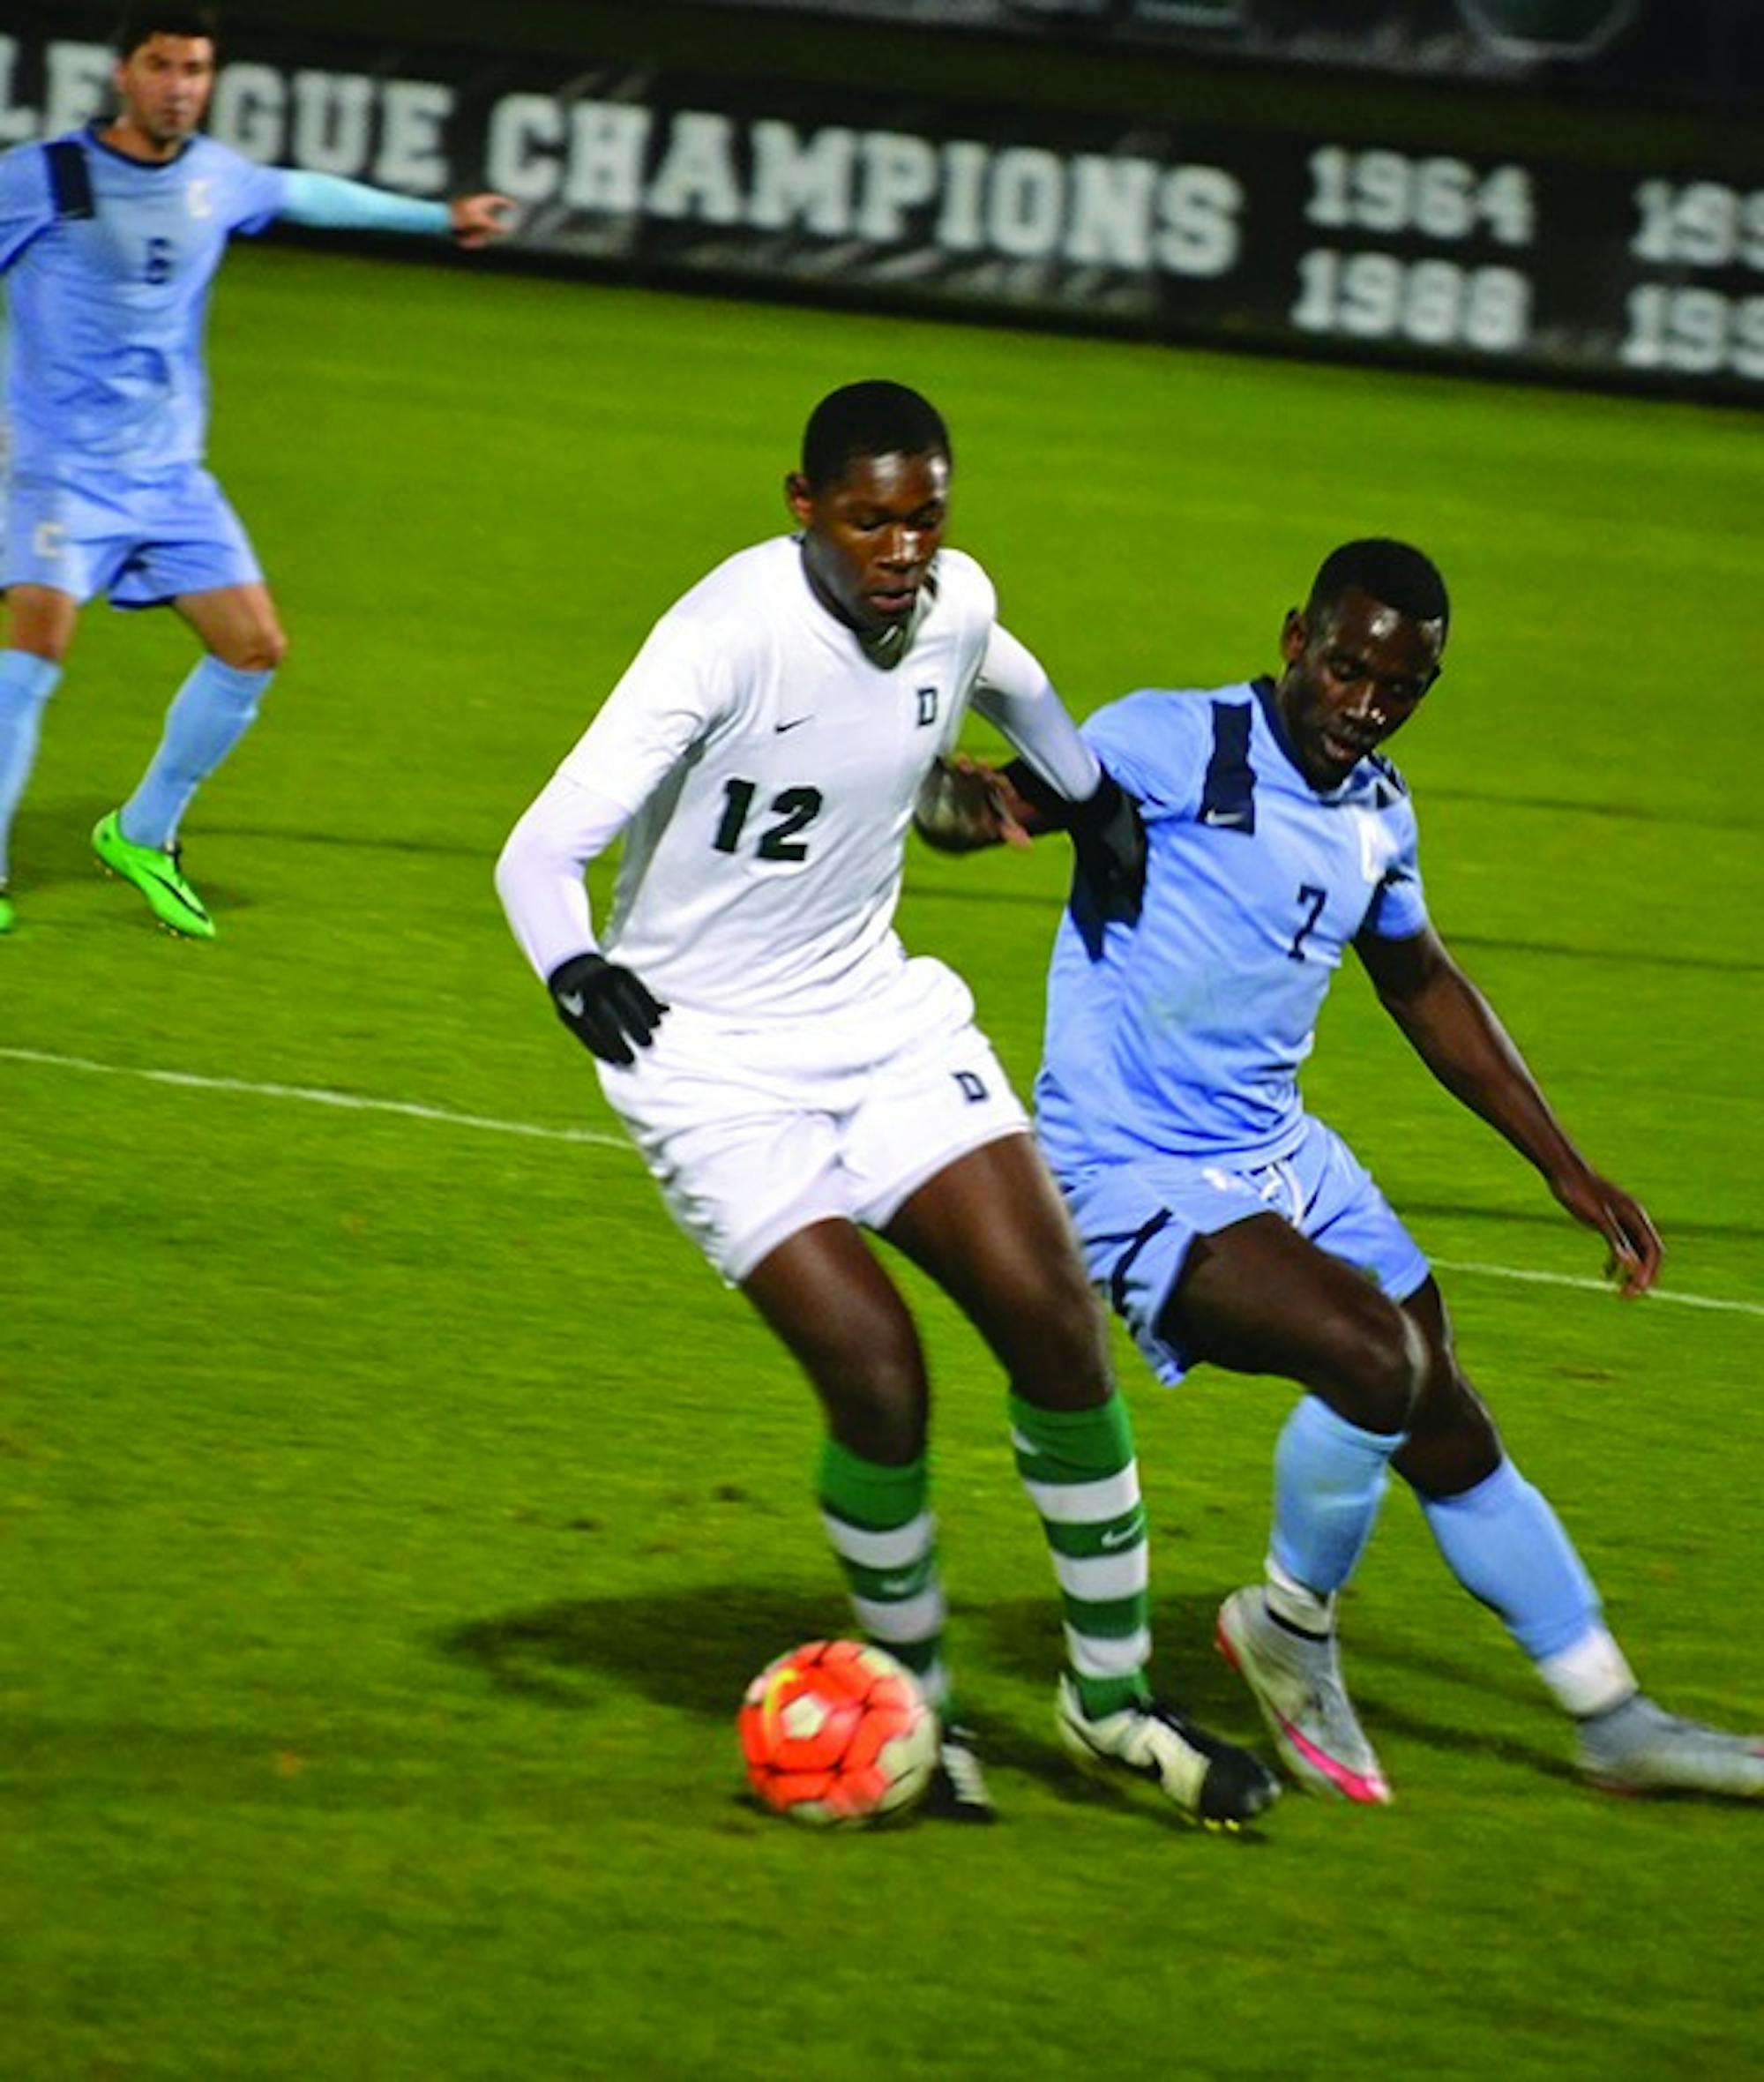 Before coming to Dartmouth, Eduvie Ikoba ’19 played soccer in three different states, honing his skills with several different clubs and coaches.